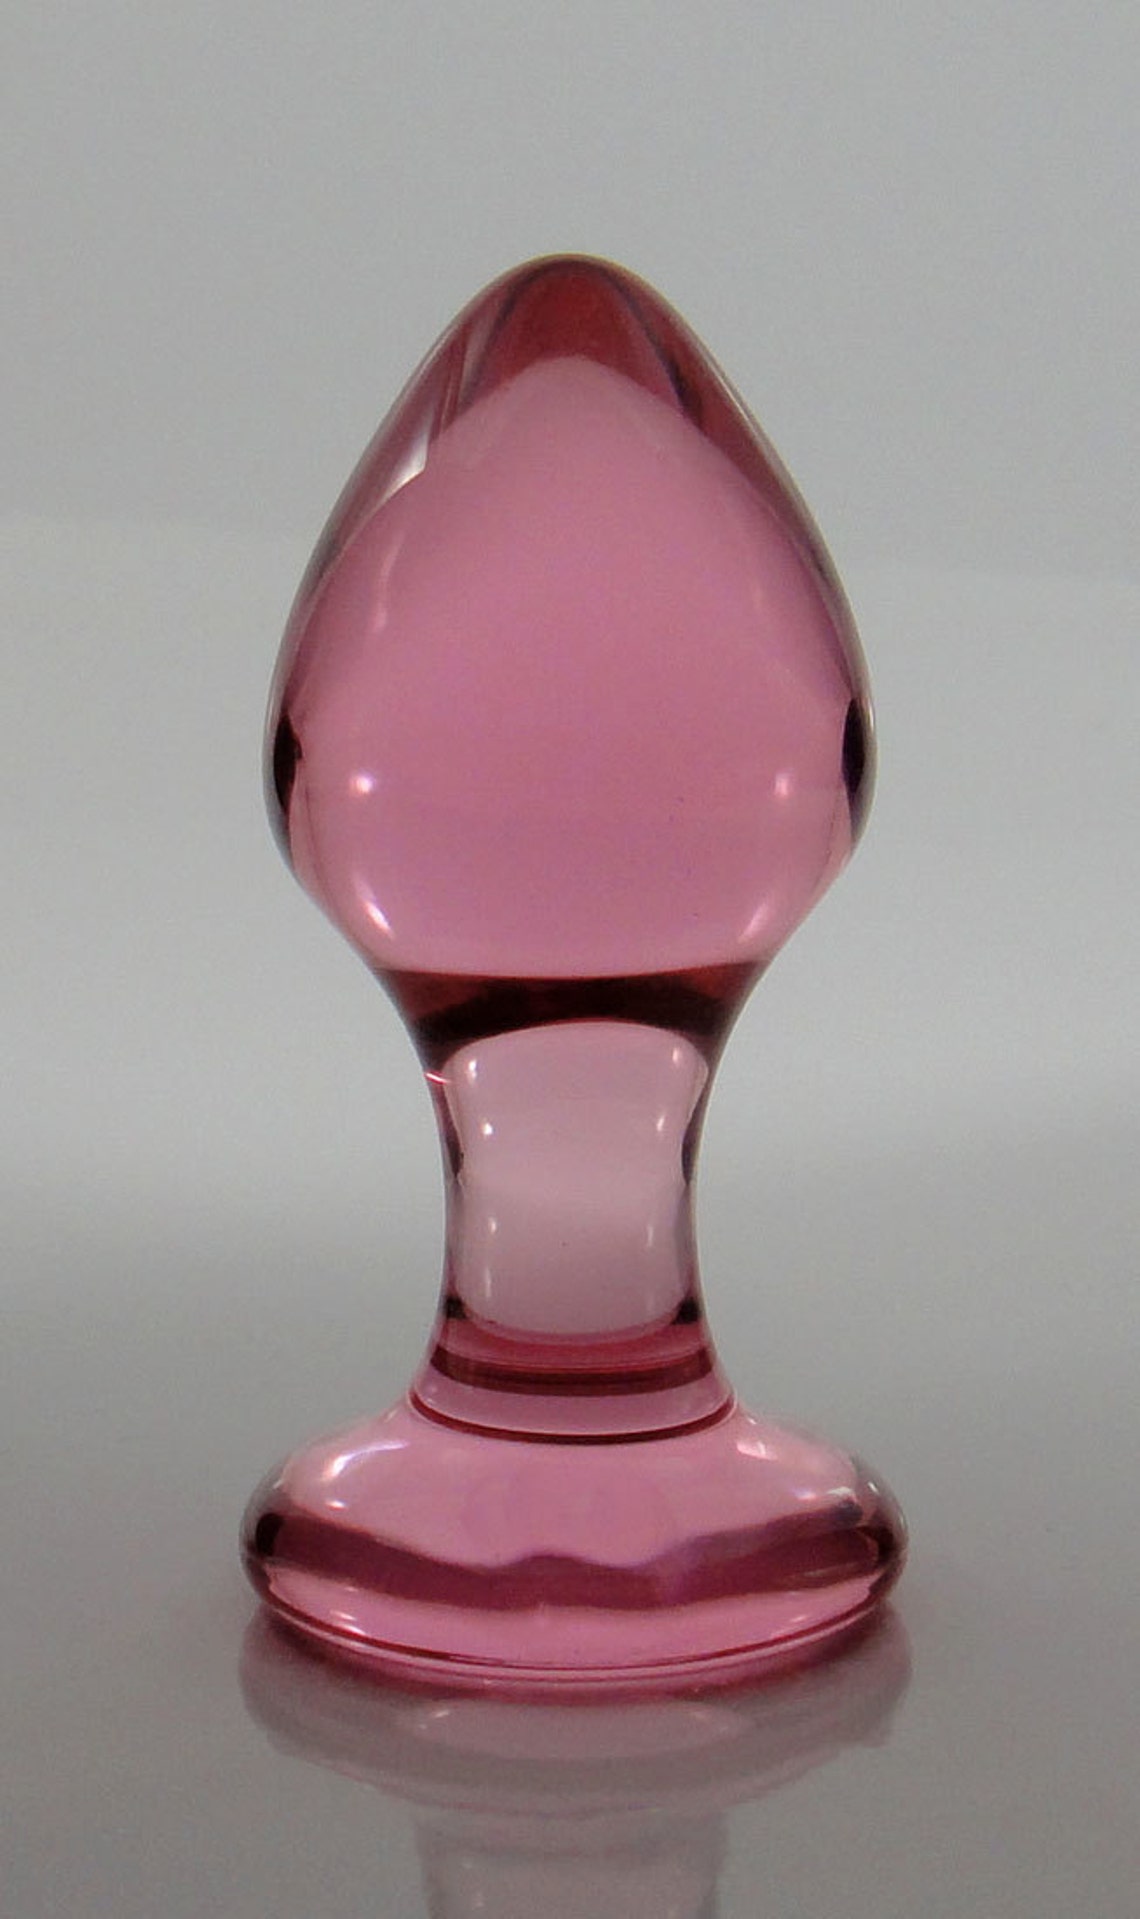 Small Pink Glass Rosebud Butt Plug Sex Toy Etsy 